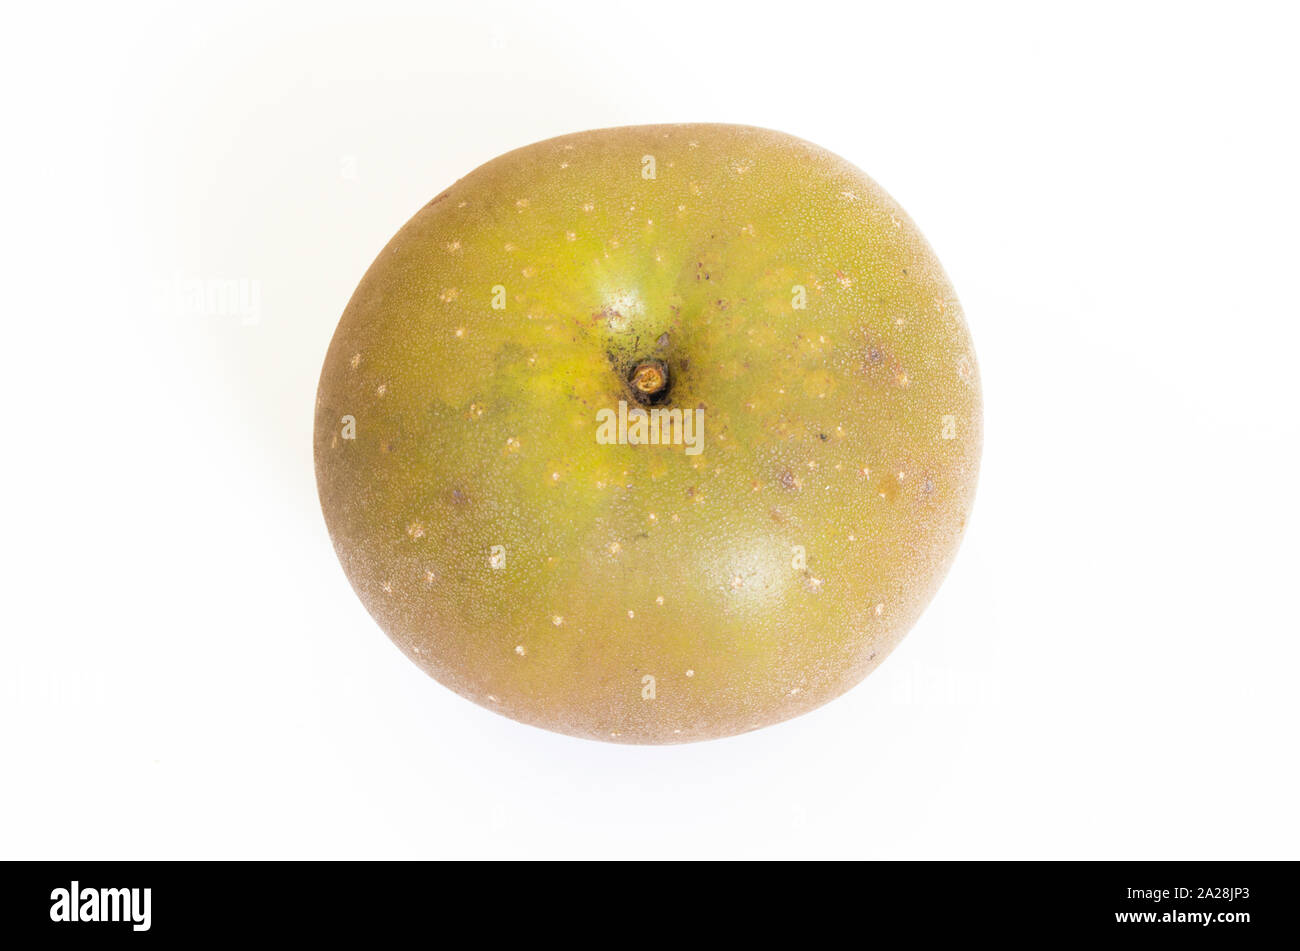 Russet Apple Fruit Variety On A White Background Stock Photo